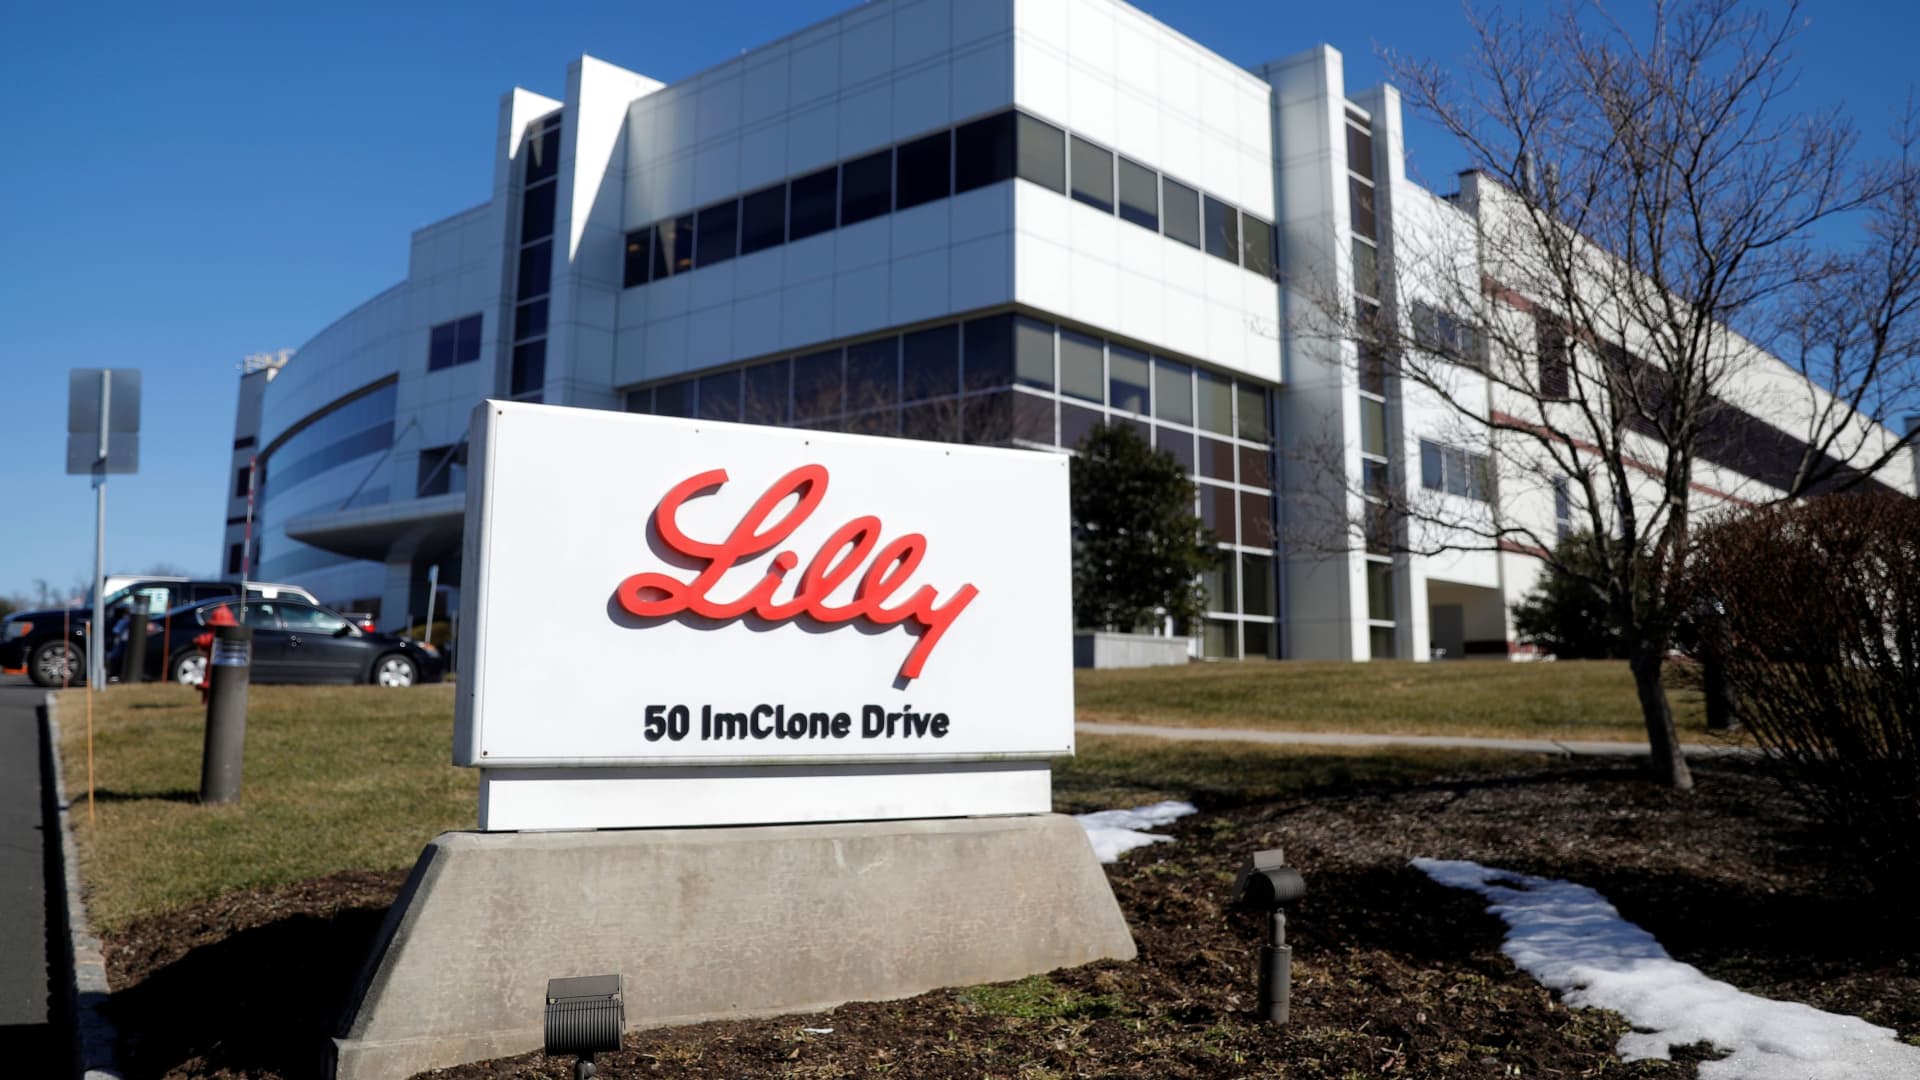 Large Indiana employers Eli Lilly and Cummins speak out about the state's new restrictive abortion law